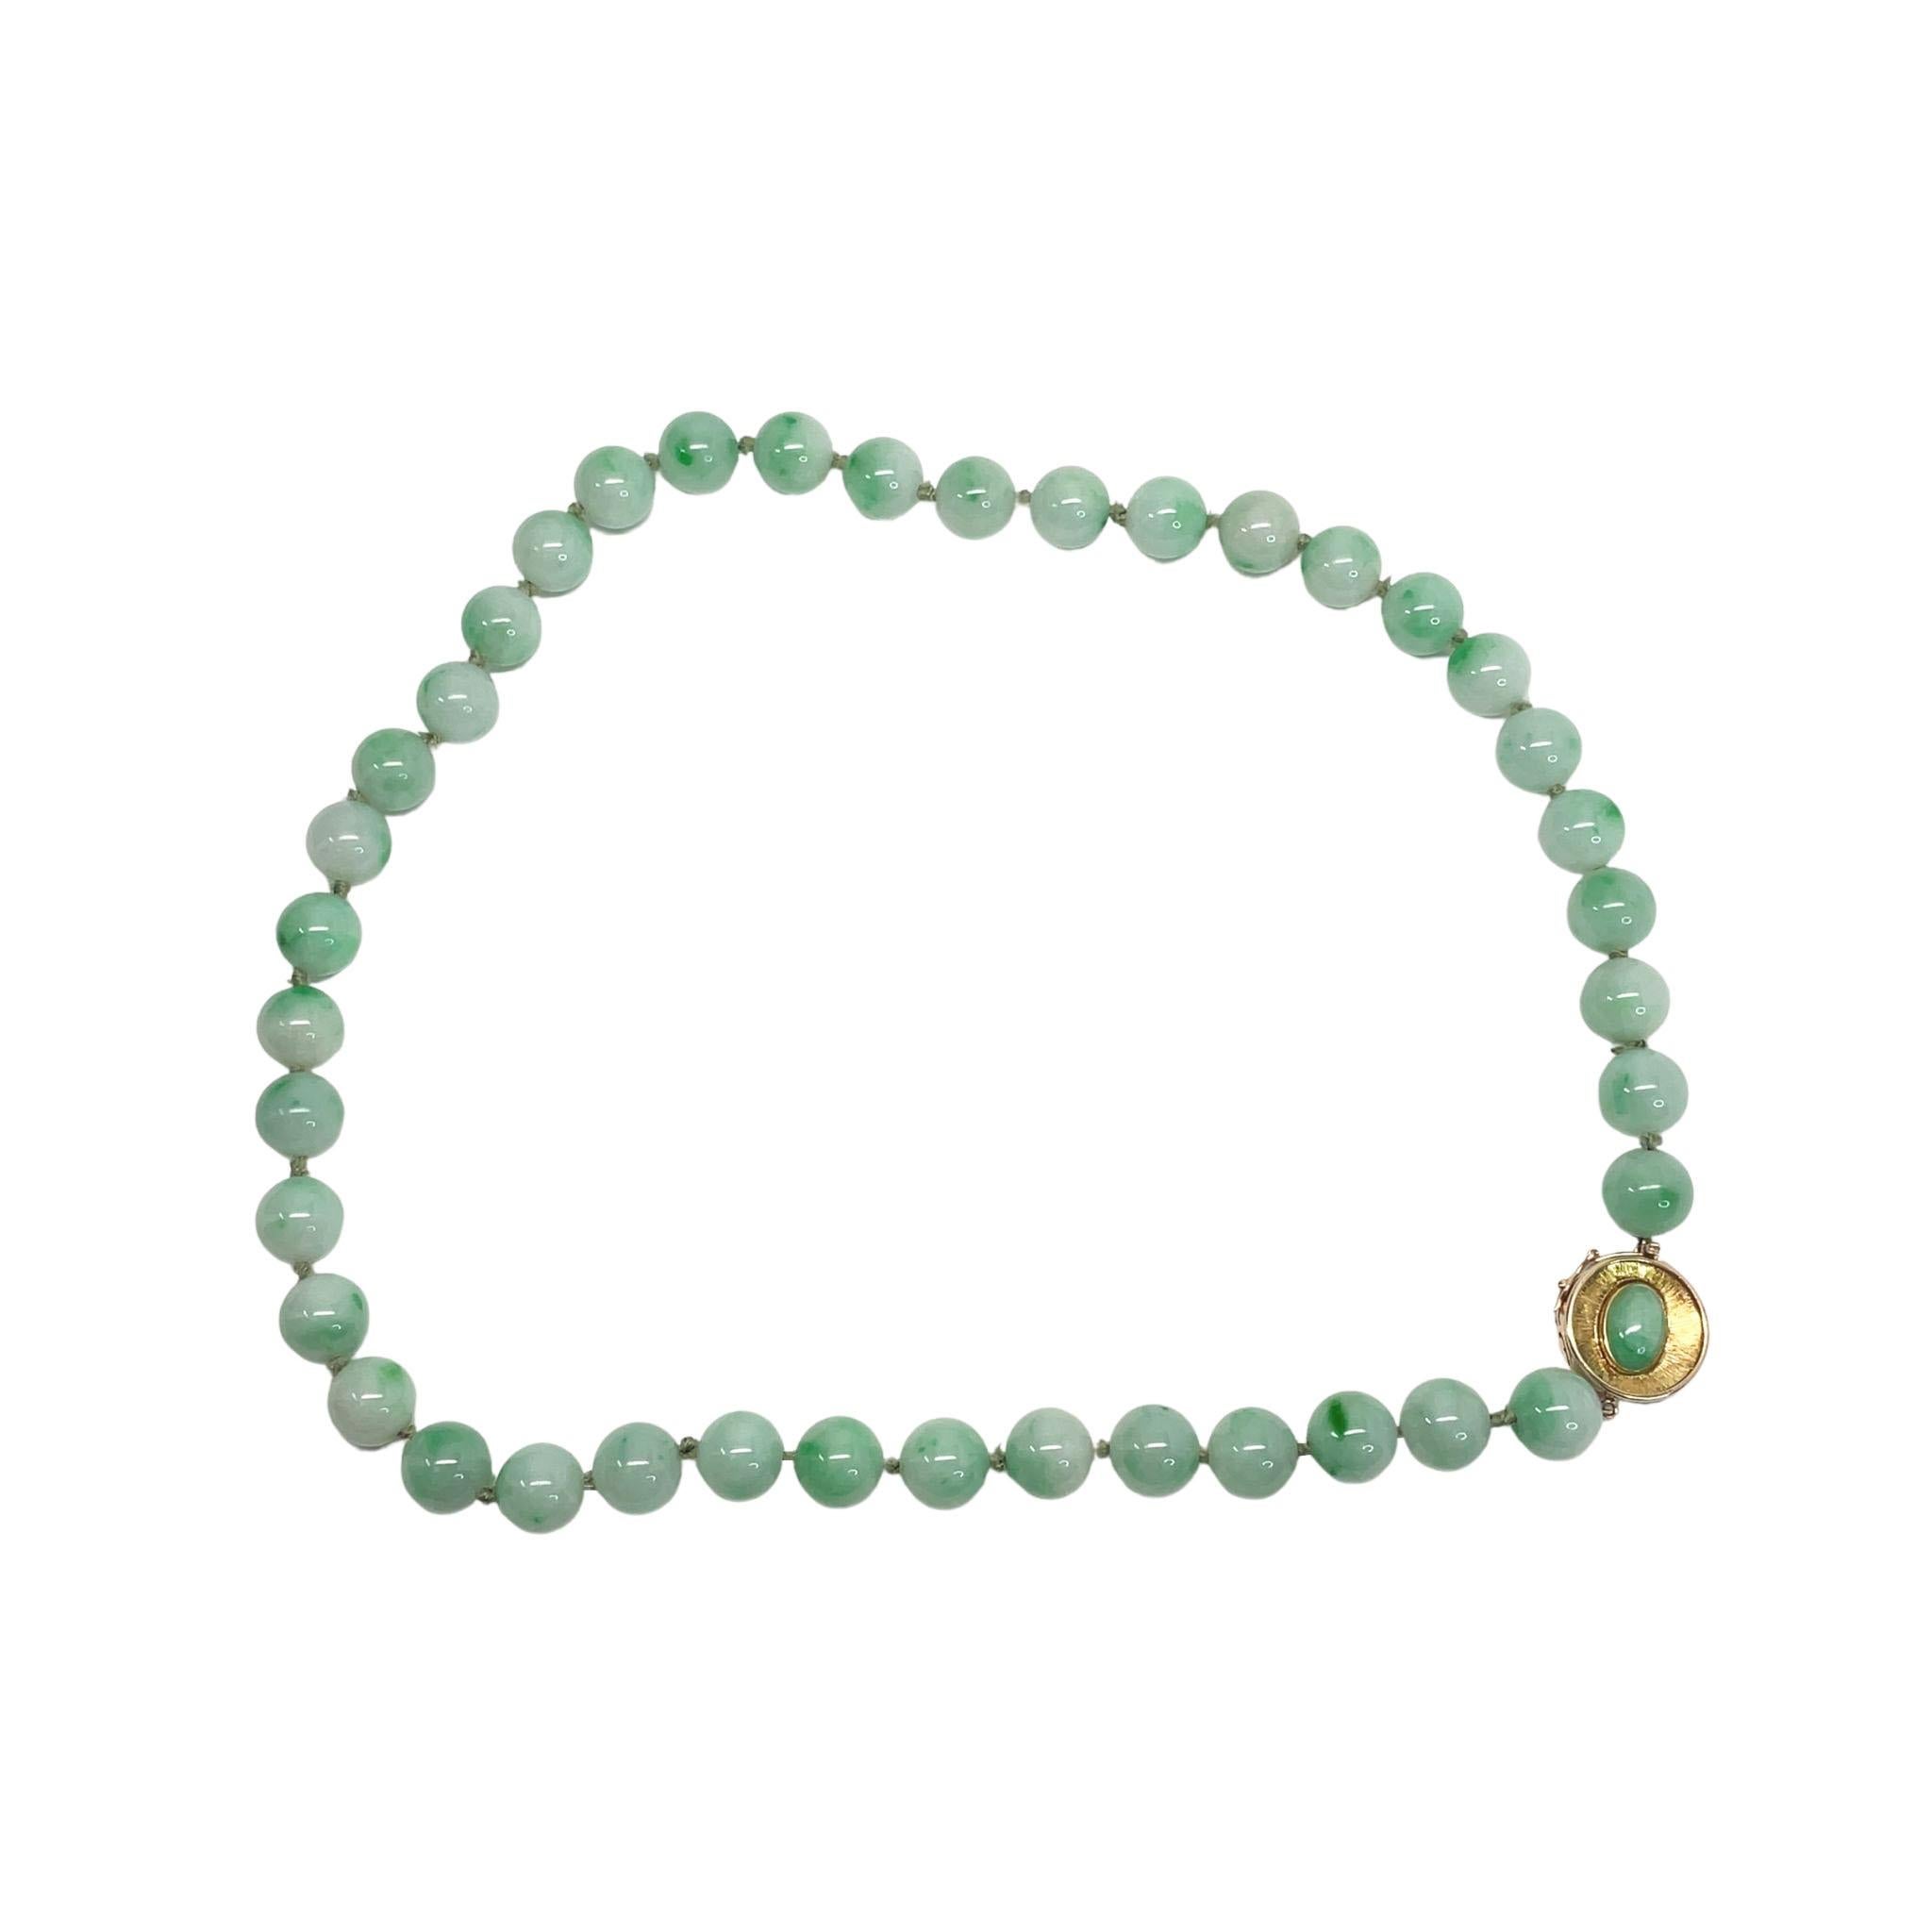 This is an absolutely stunning natural jade beaded necklace with a 14K yellow gold clasp. The cool green of this magnificent necklace is reminiscent of the color of the jungles of Southeast Asia. 

This necklace has been certified by the Gemological